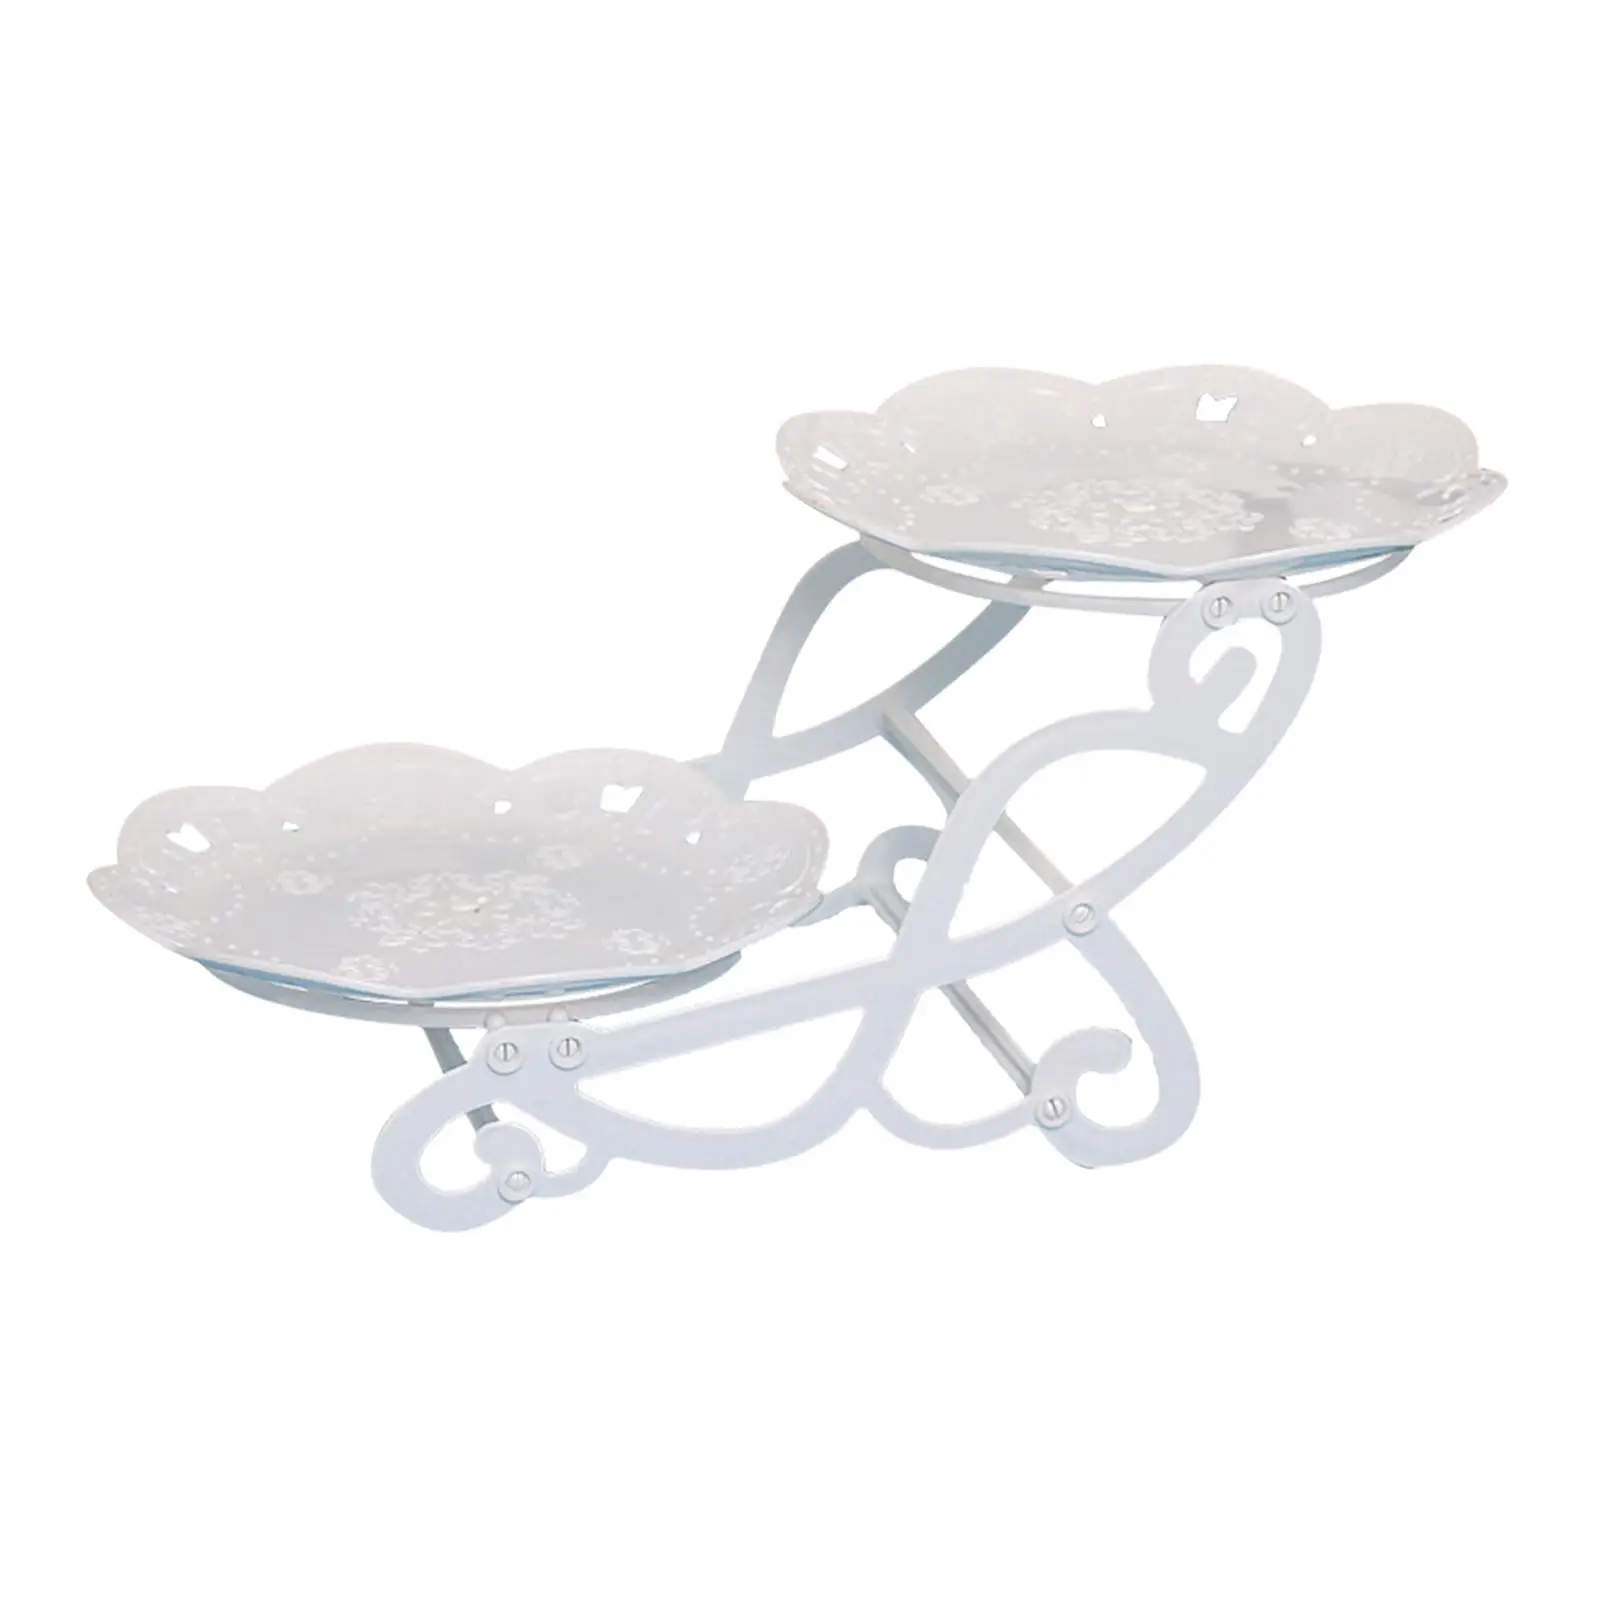 2 Tiers Cake Stand Snack Display Tray Dessert Tray for Dessert Afternoon Tea